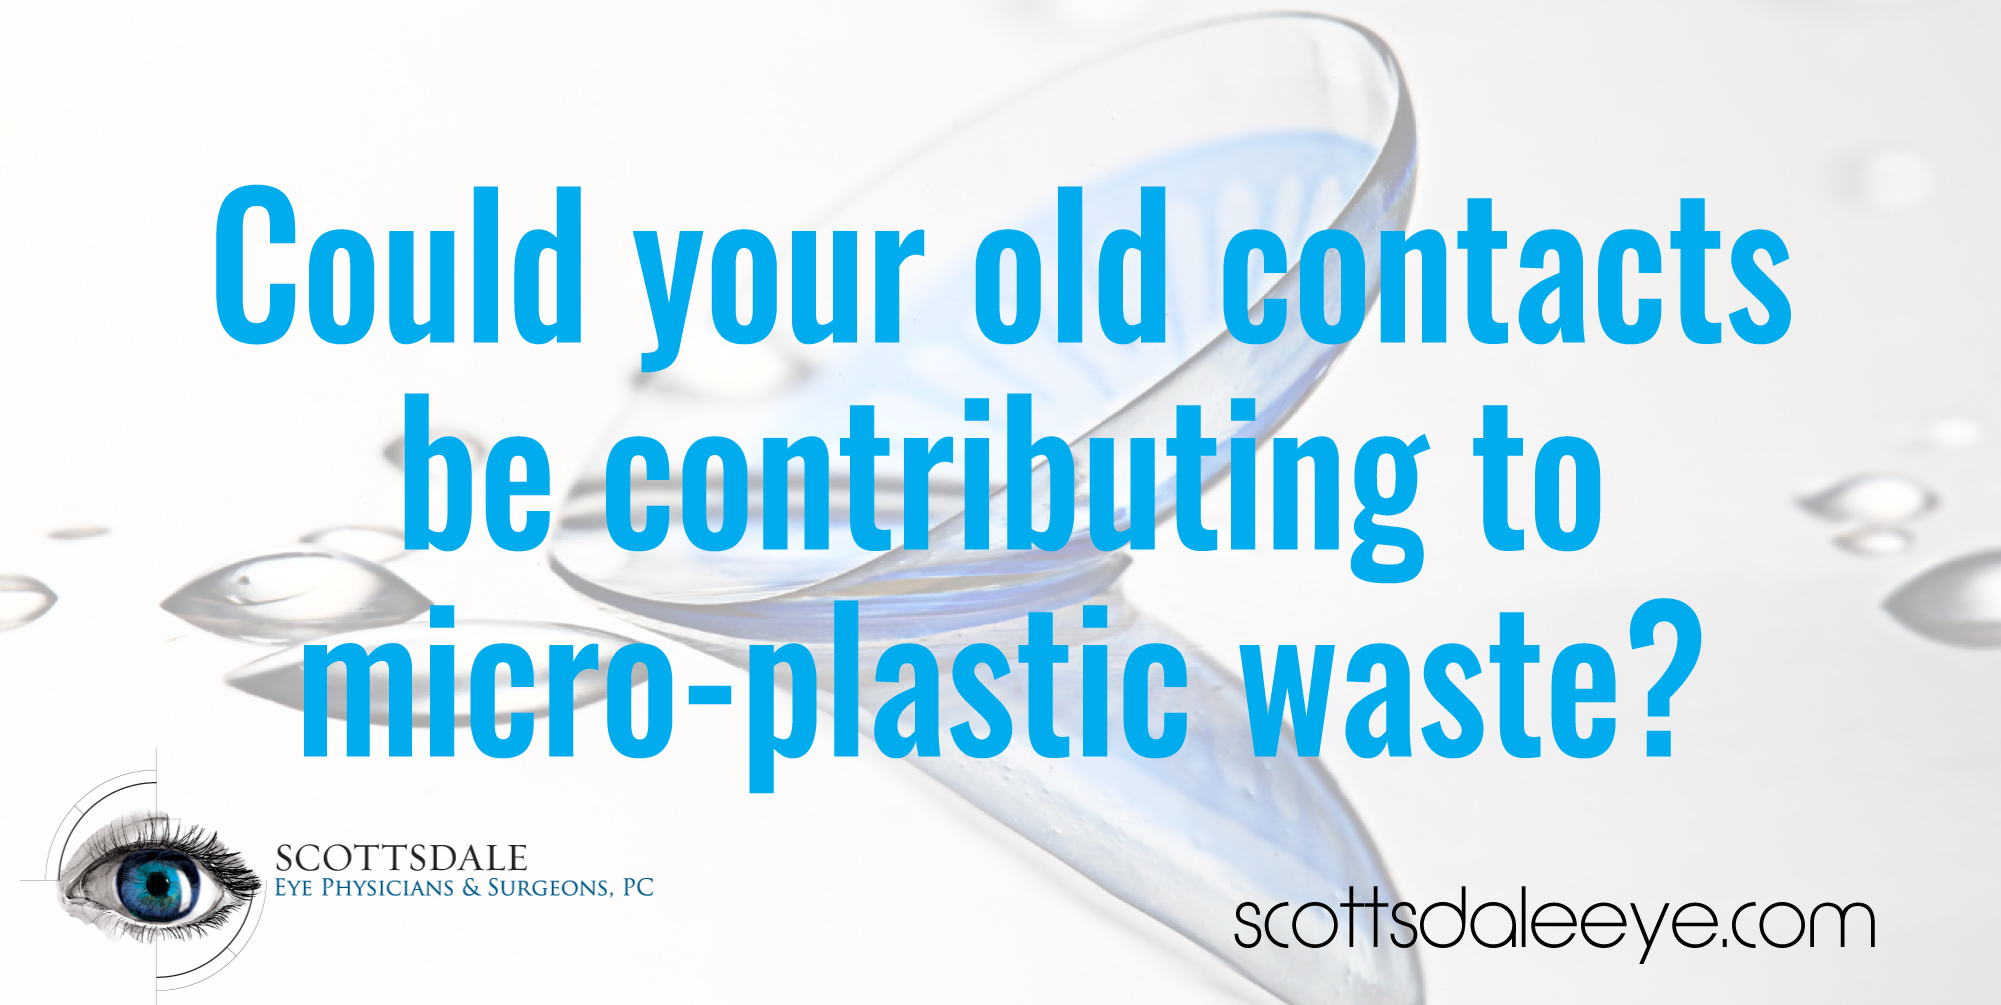 Where Do you Dispose of Your Old Contact Lenses?